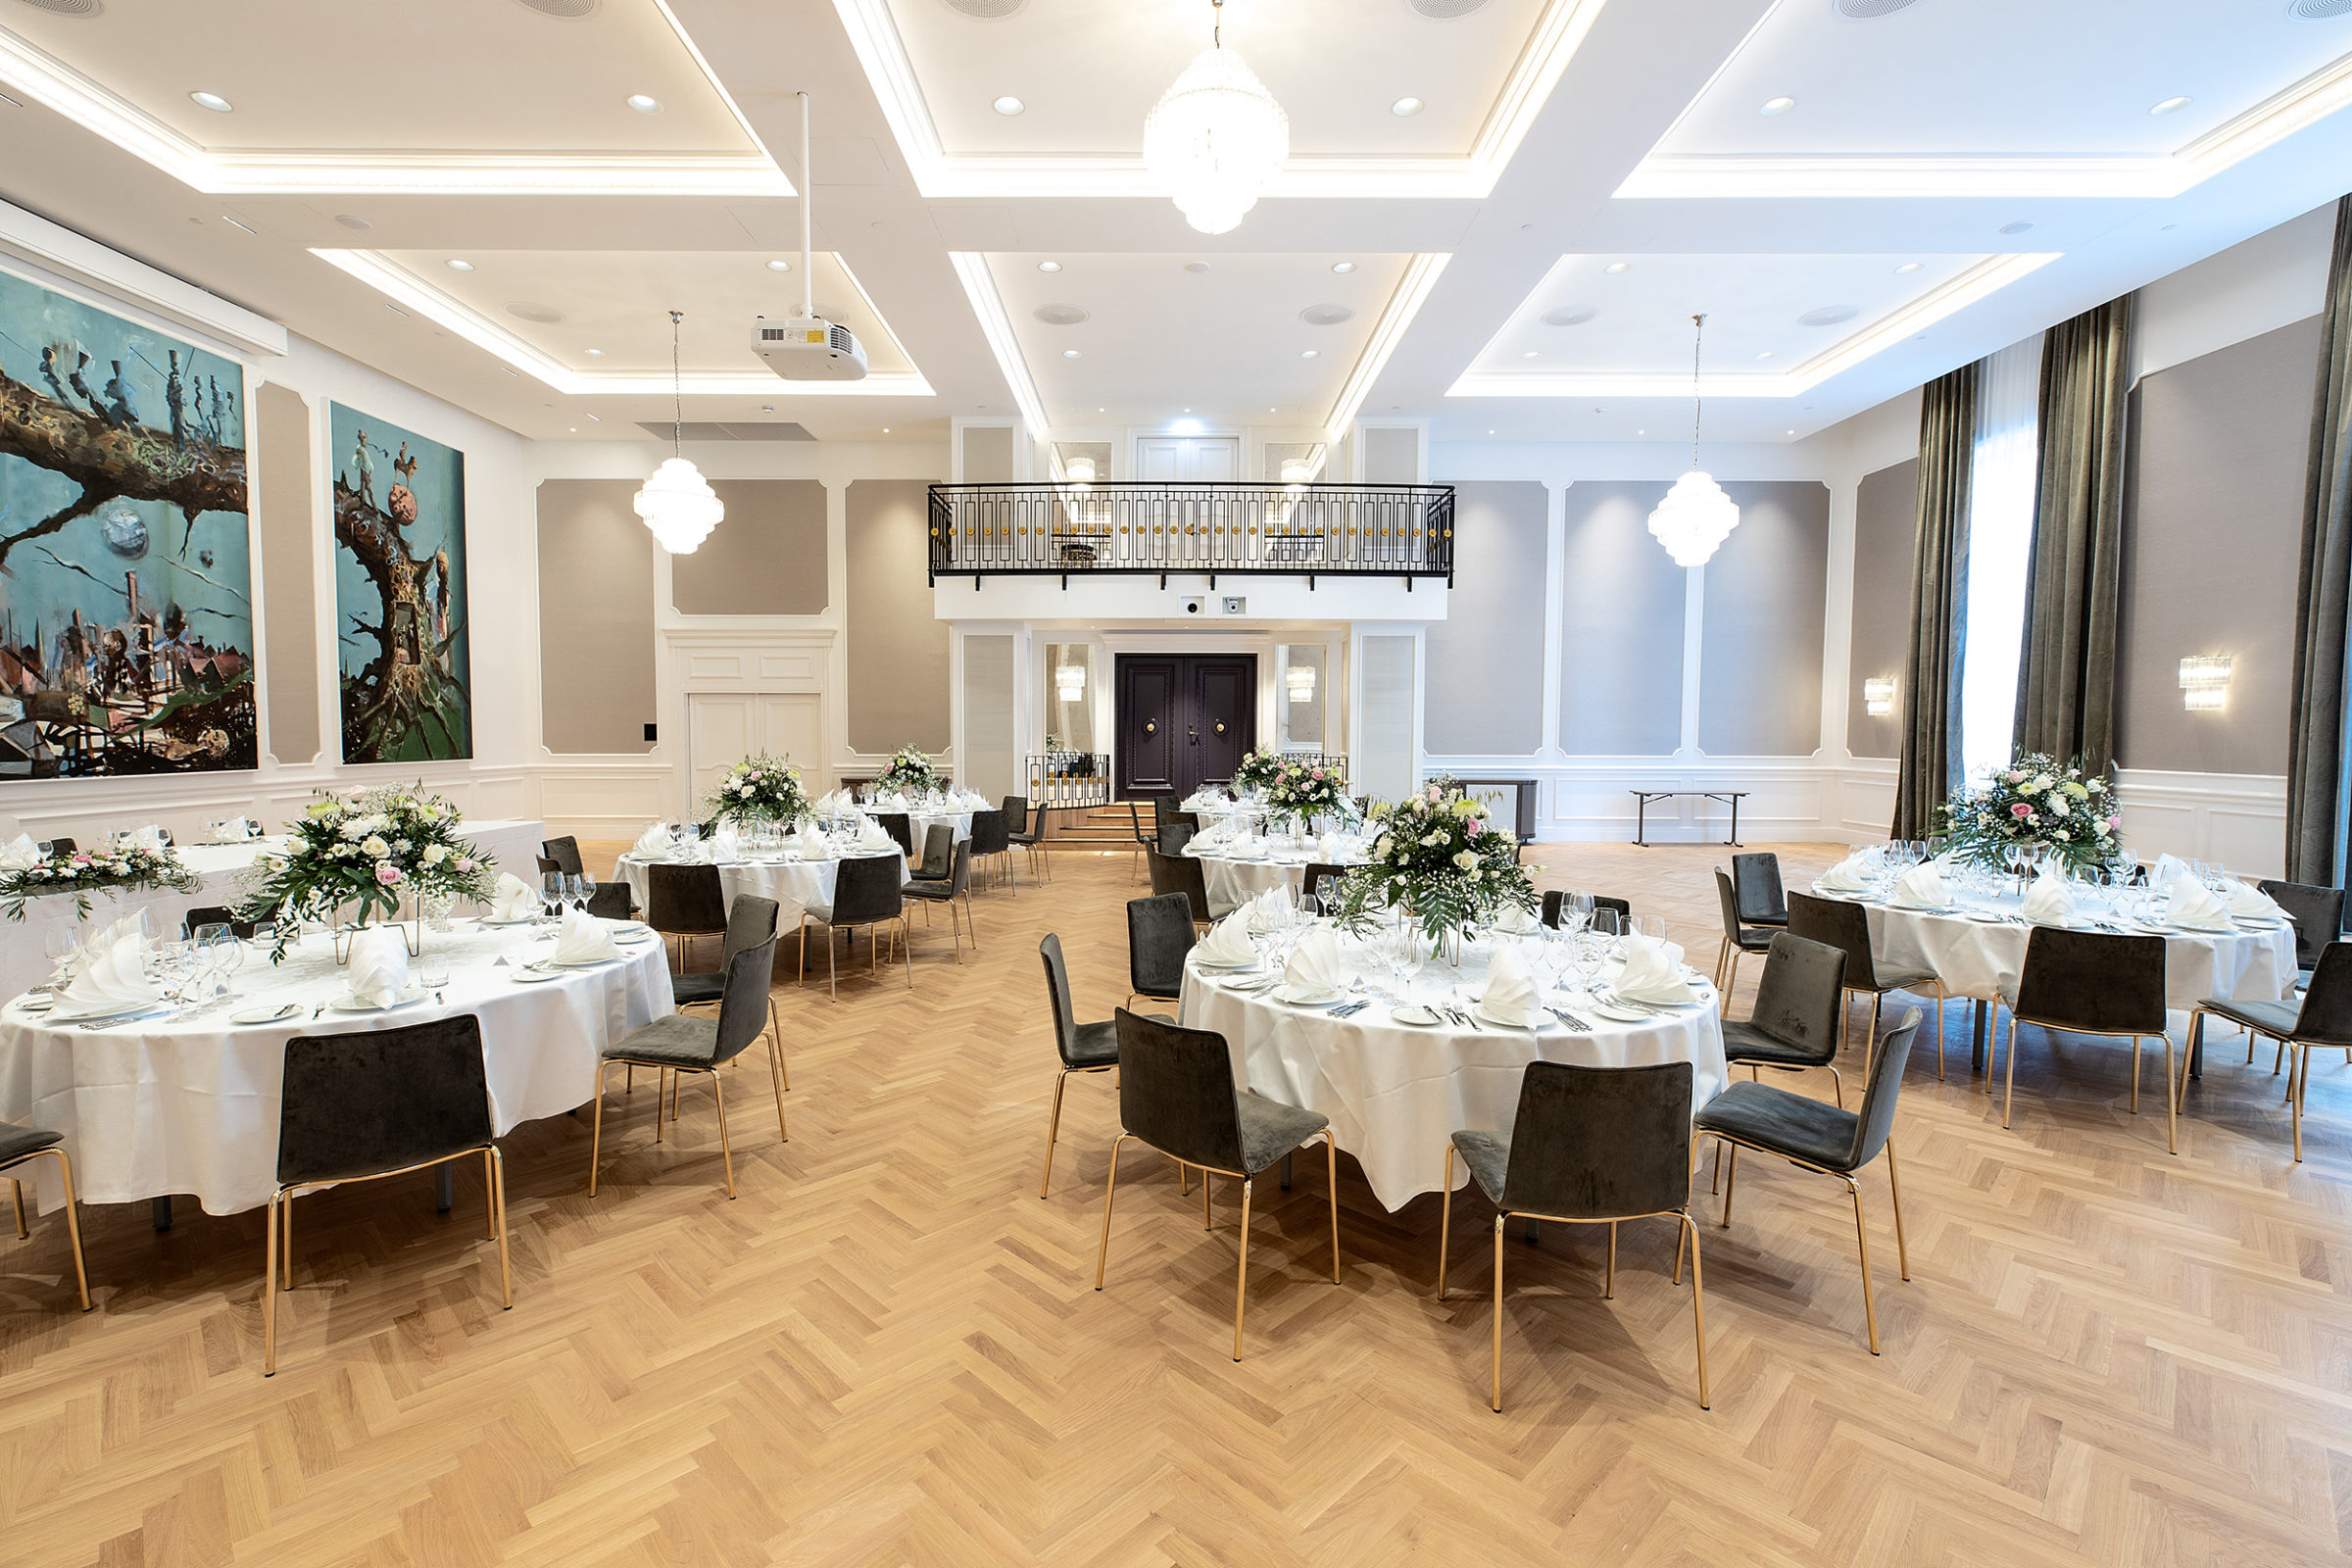 Britannia Hall with round table seating, decorated with white details for wedding venues